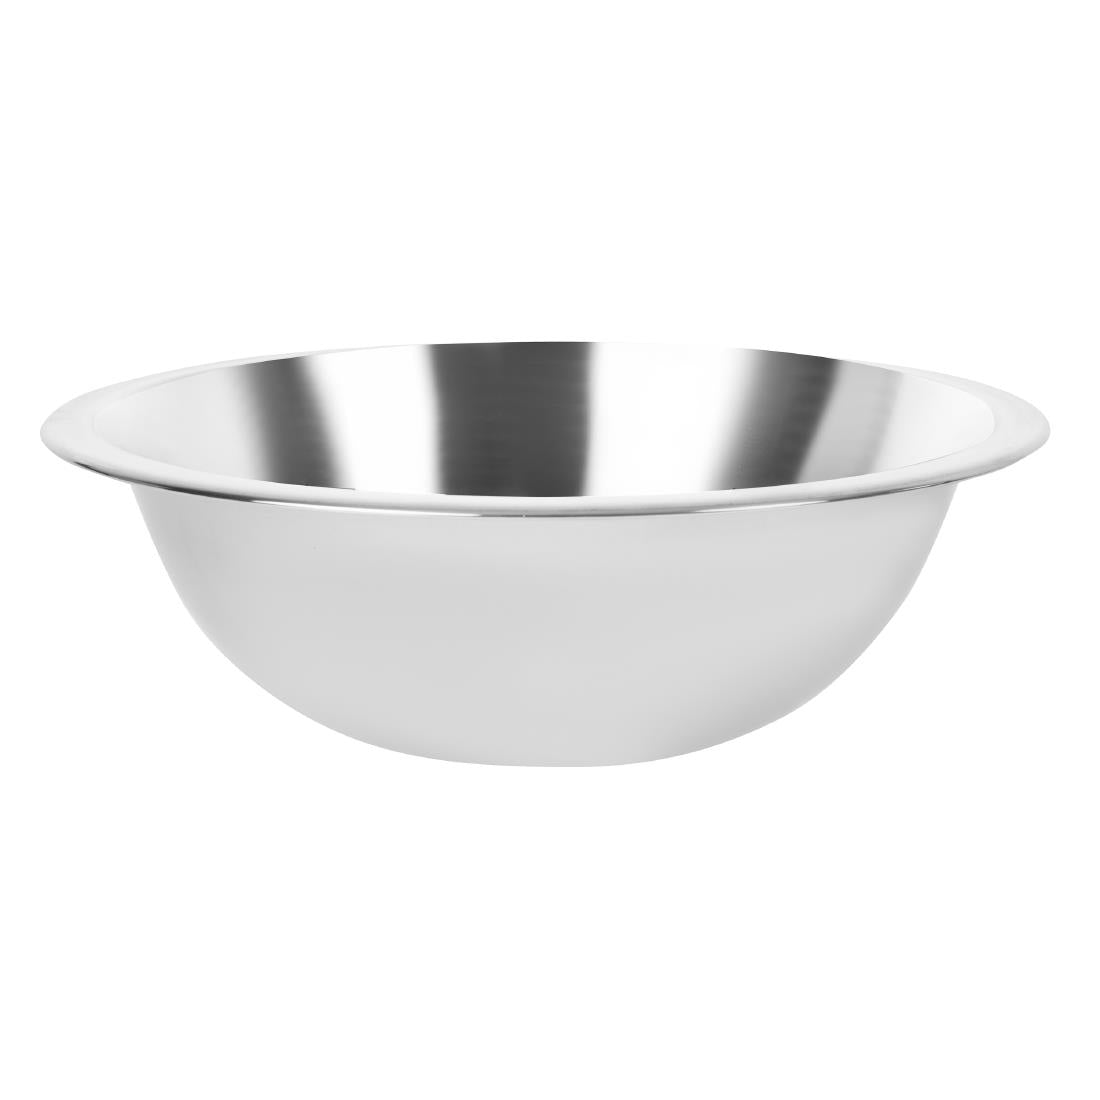 DL937 Vogue Stainless Steel Mixing Bowl 1Ltr JD Catering Equipment Solutions Ltd